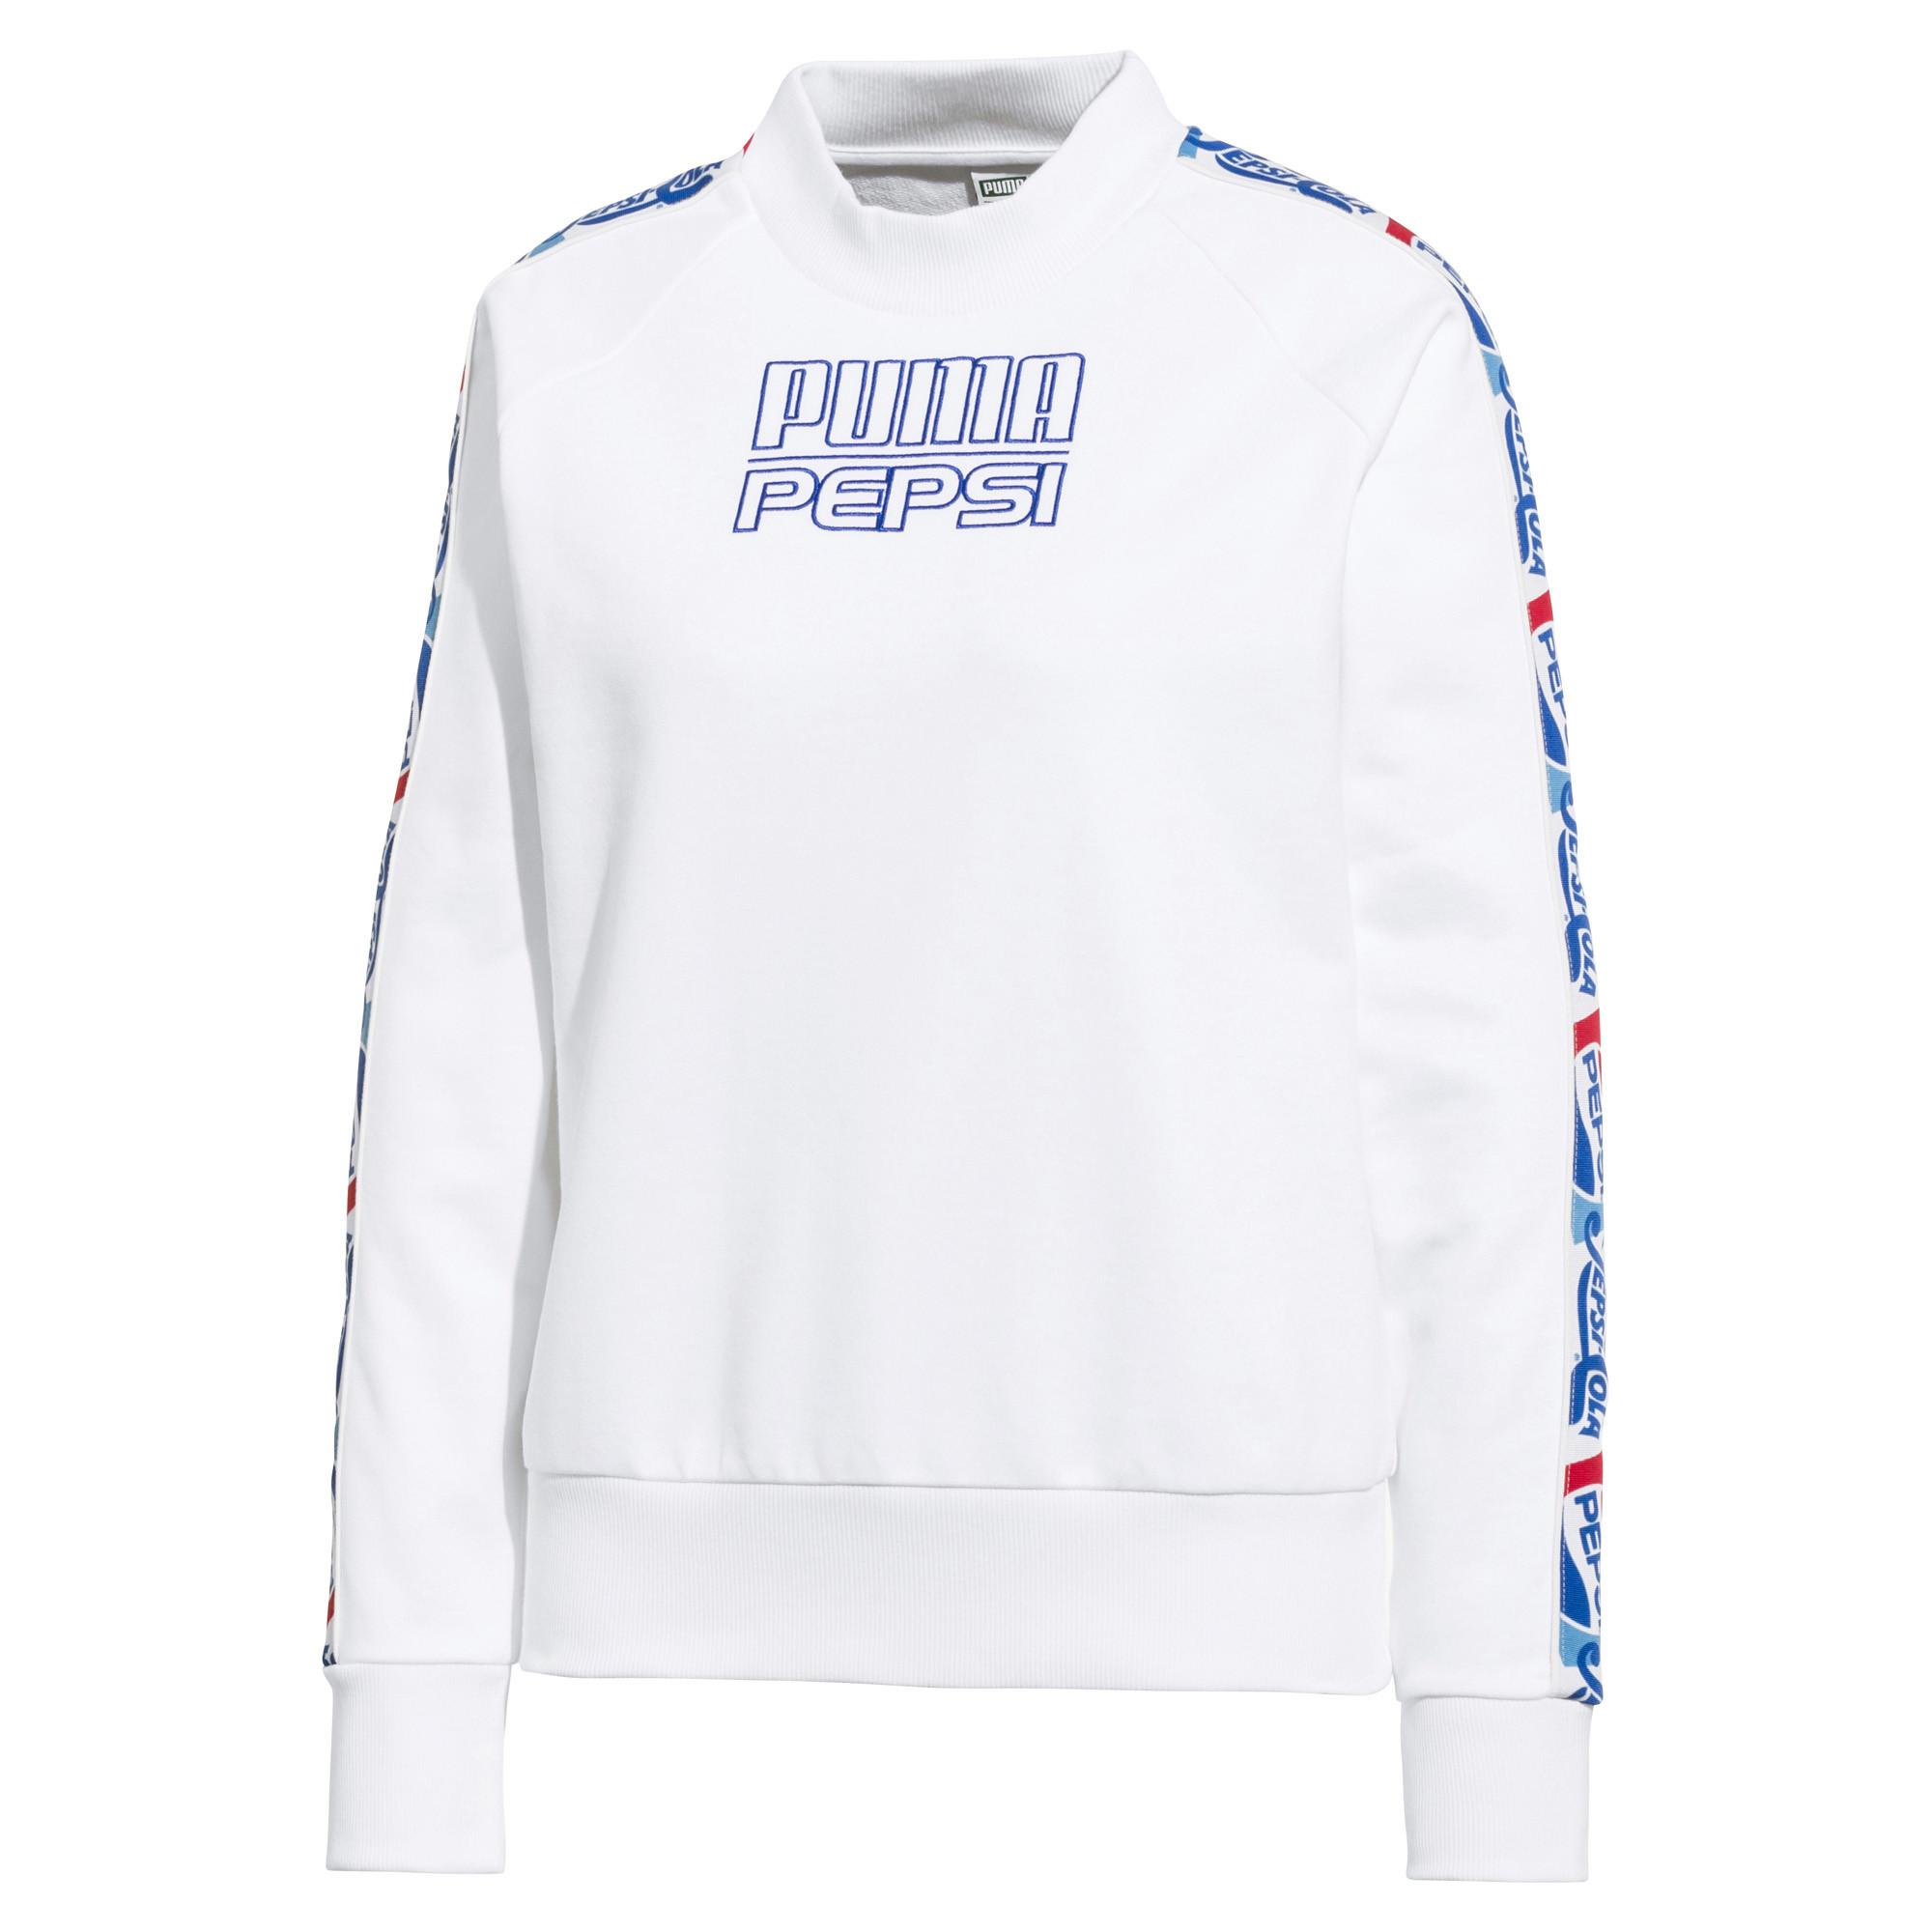 Puma Pepsi Hoodie Outlet - playgrowned.com 1687984398